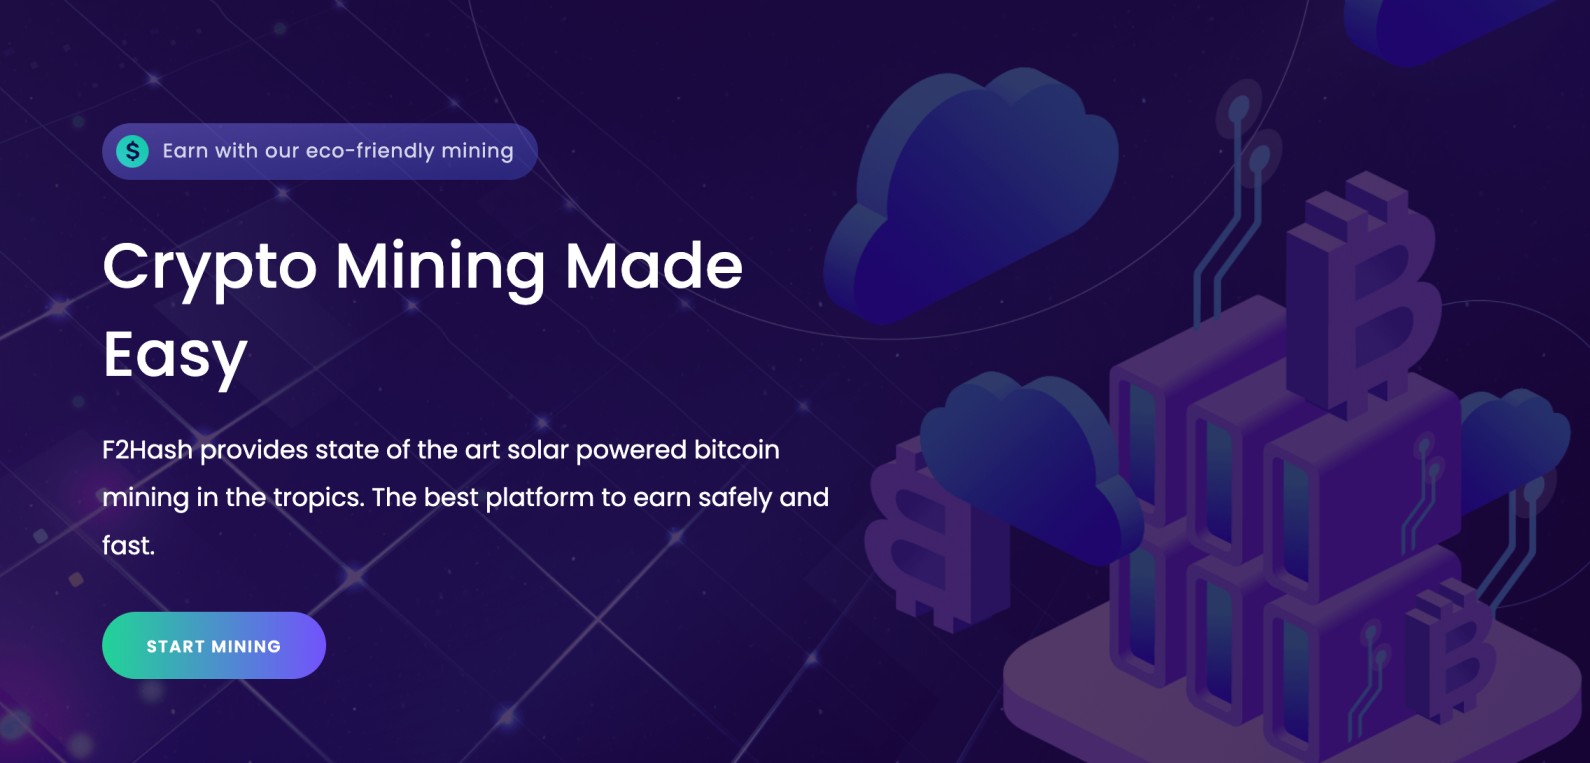 The Best Legit and Trusted Bitcoin Cloud Mining Websites Reviewed